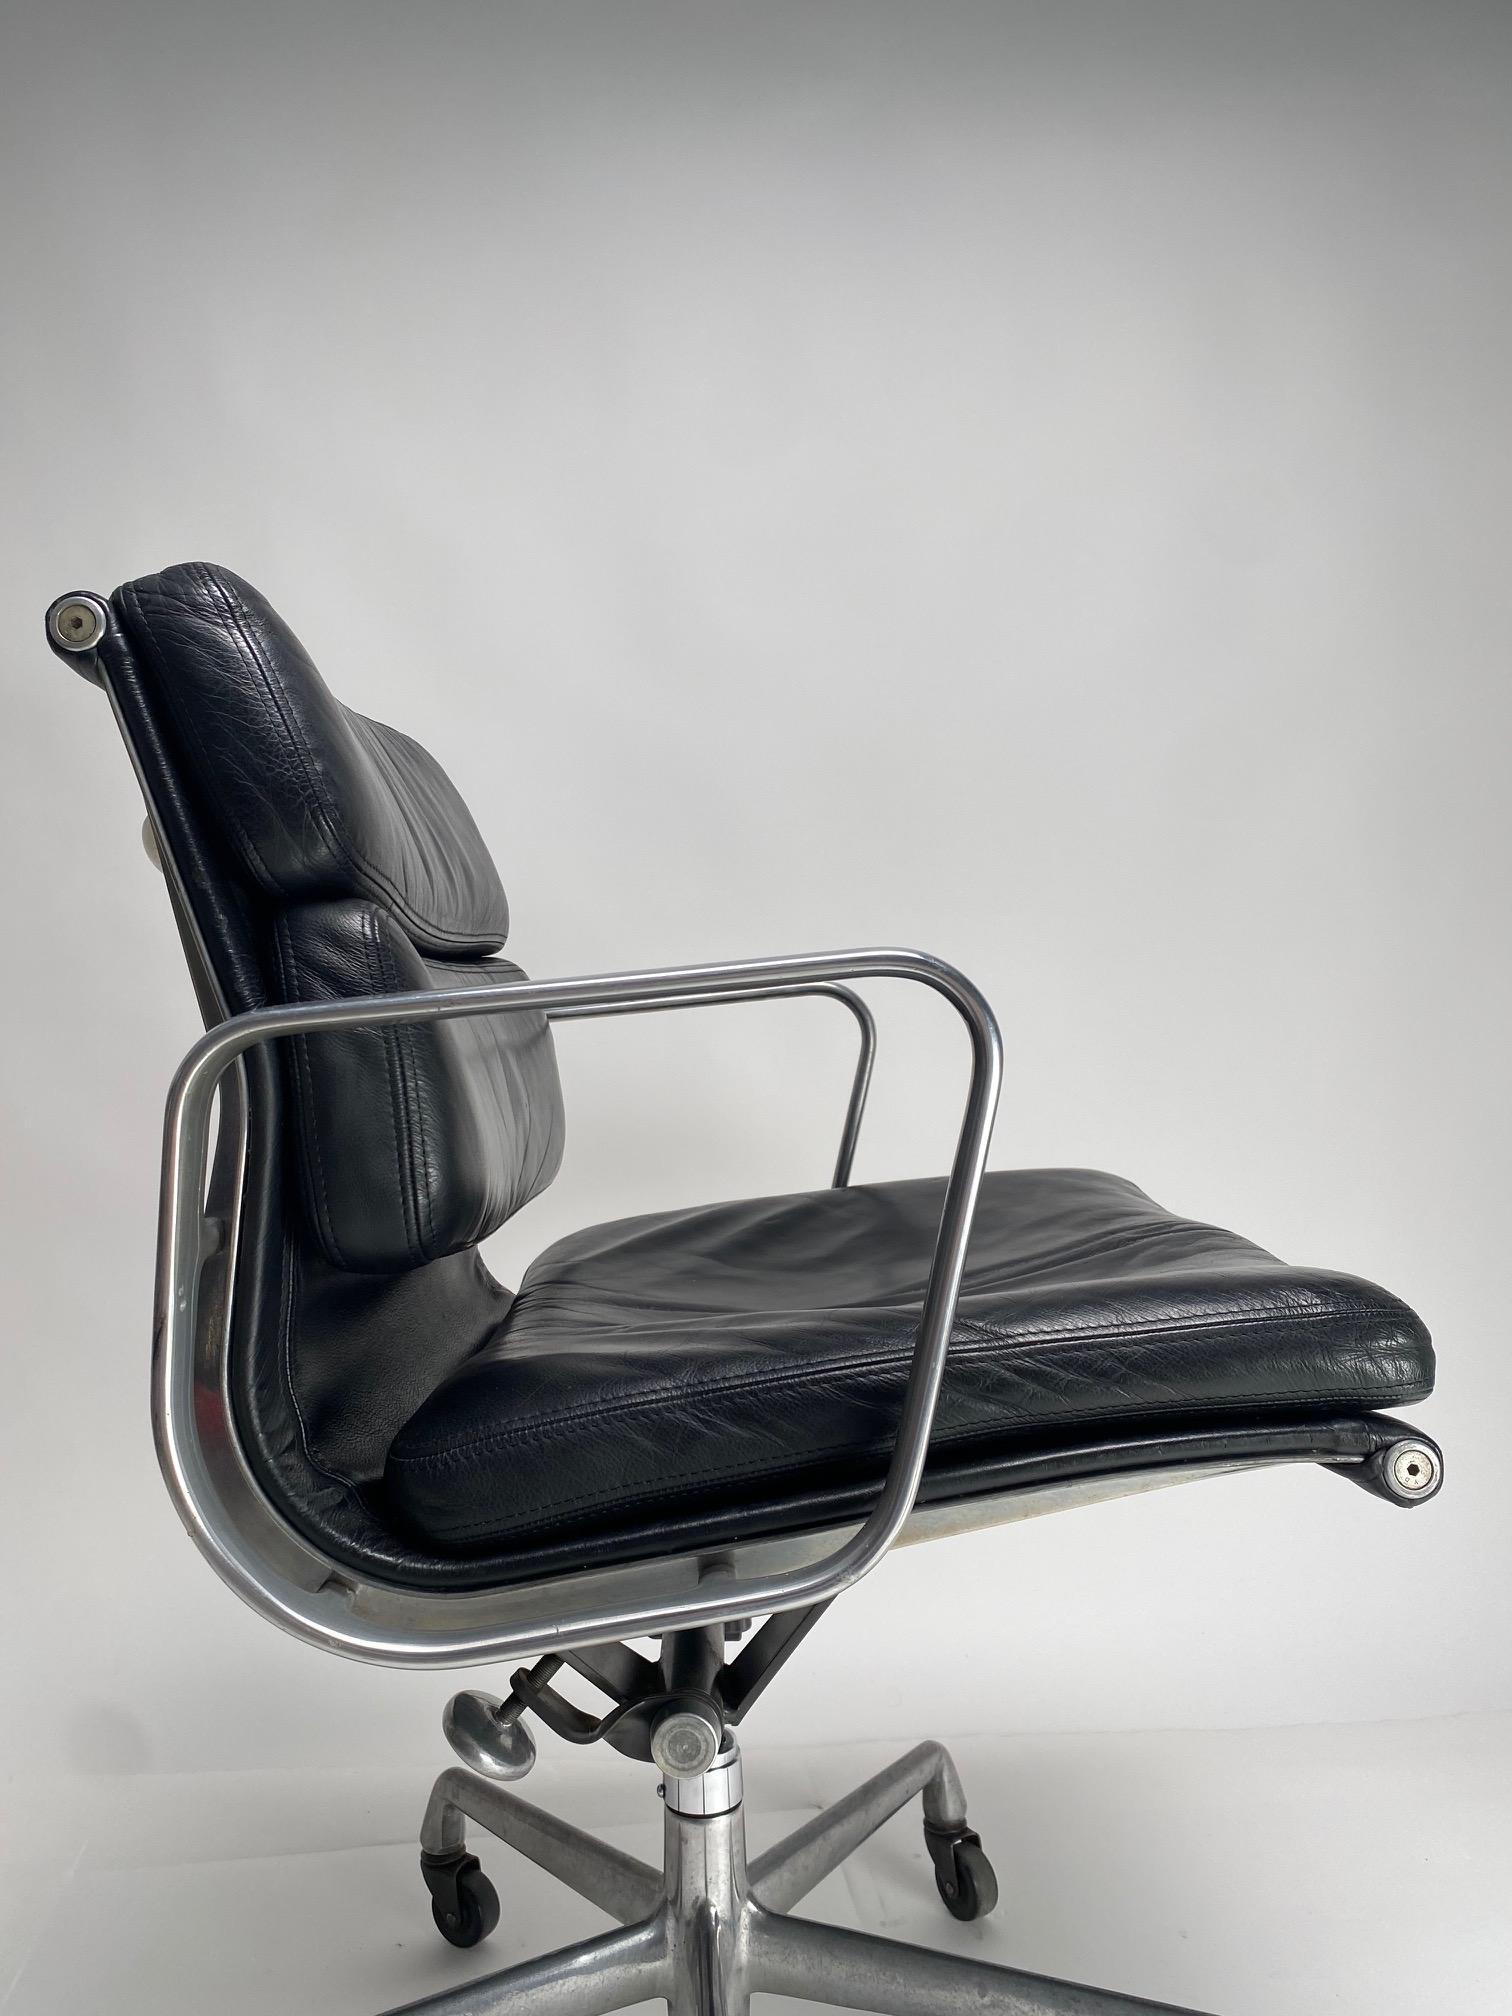 EA217 black Soft Pad Chair by Charles & Ray Eames for Herman miller, 1970s For Sale 1